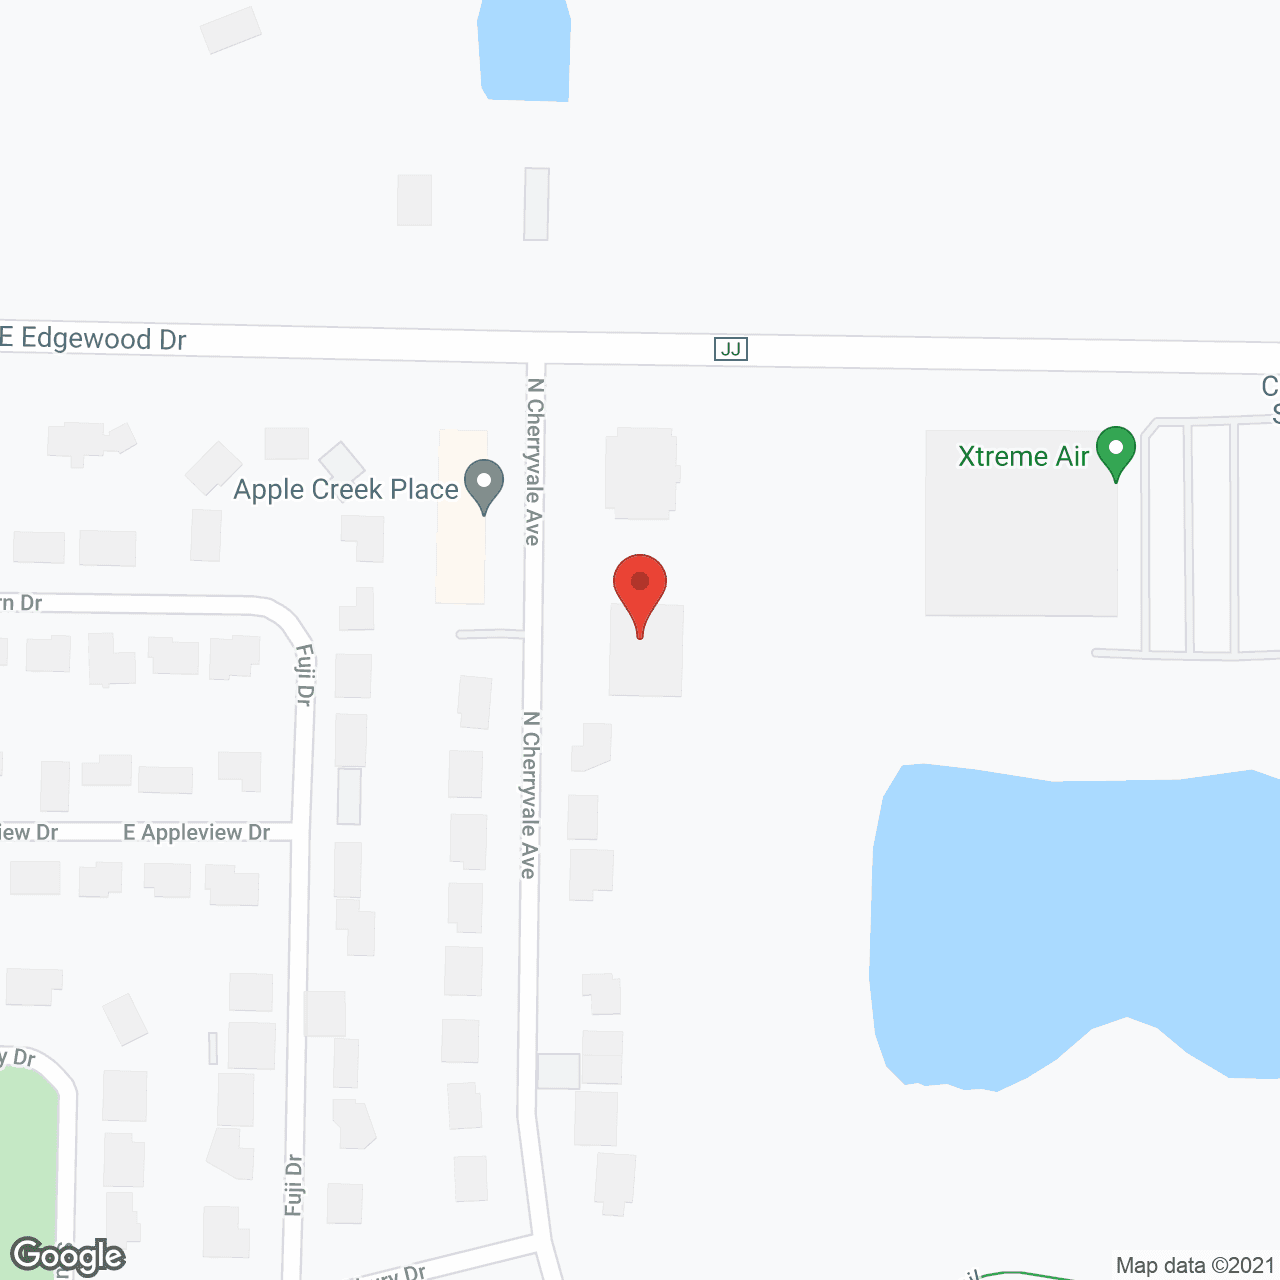 Apple Creek Place in google map